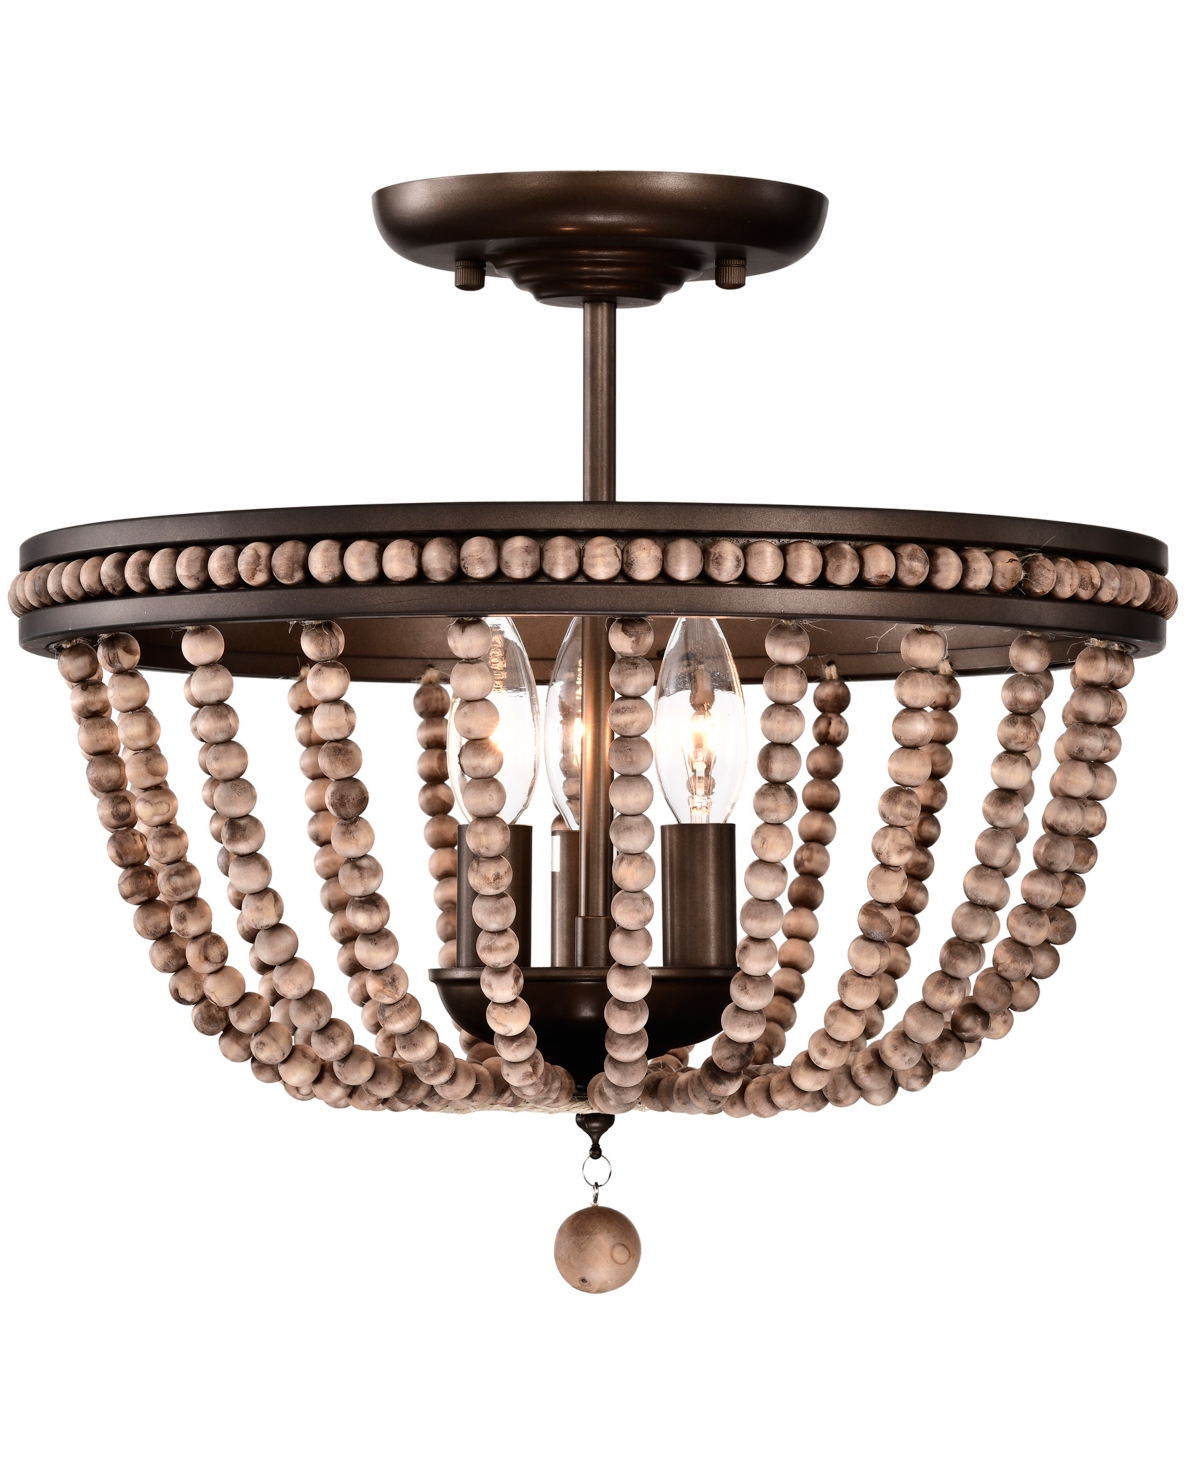 Home Accessories Ovid 16" Indoor Finish Semi-flush Mount Light With Light Kit In Matte Brown